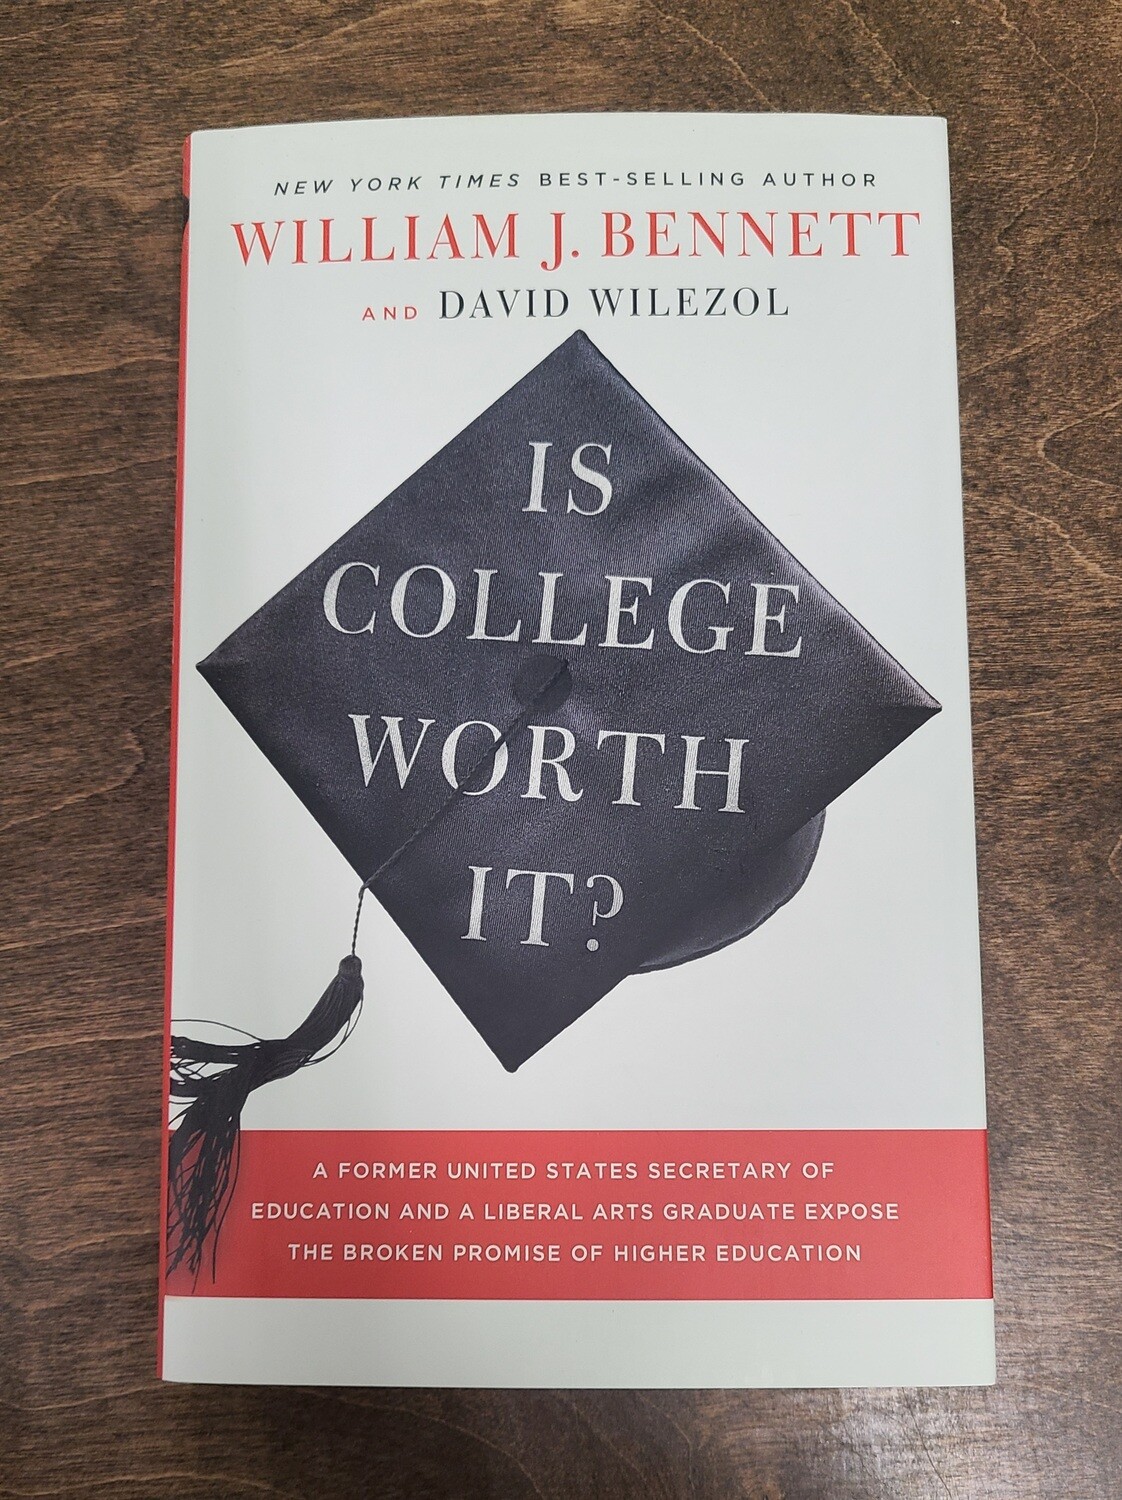 Is College Worth It? by William J. Bennett and David Wilezol